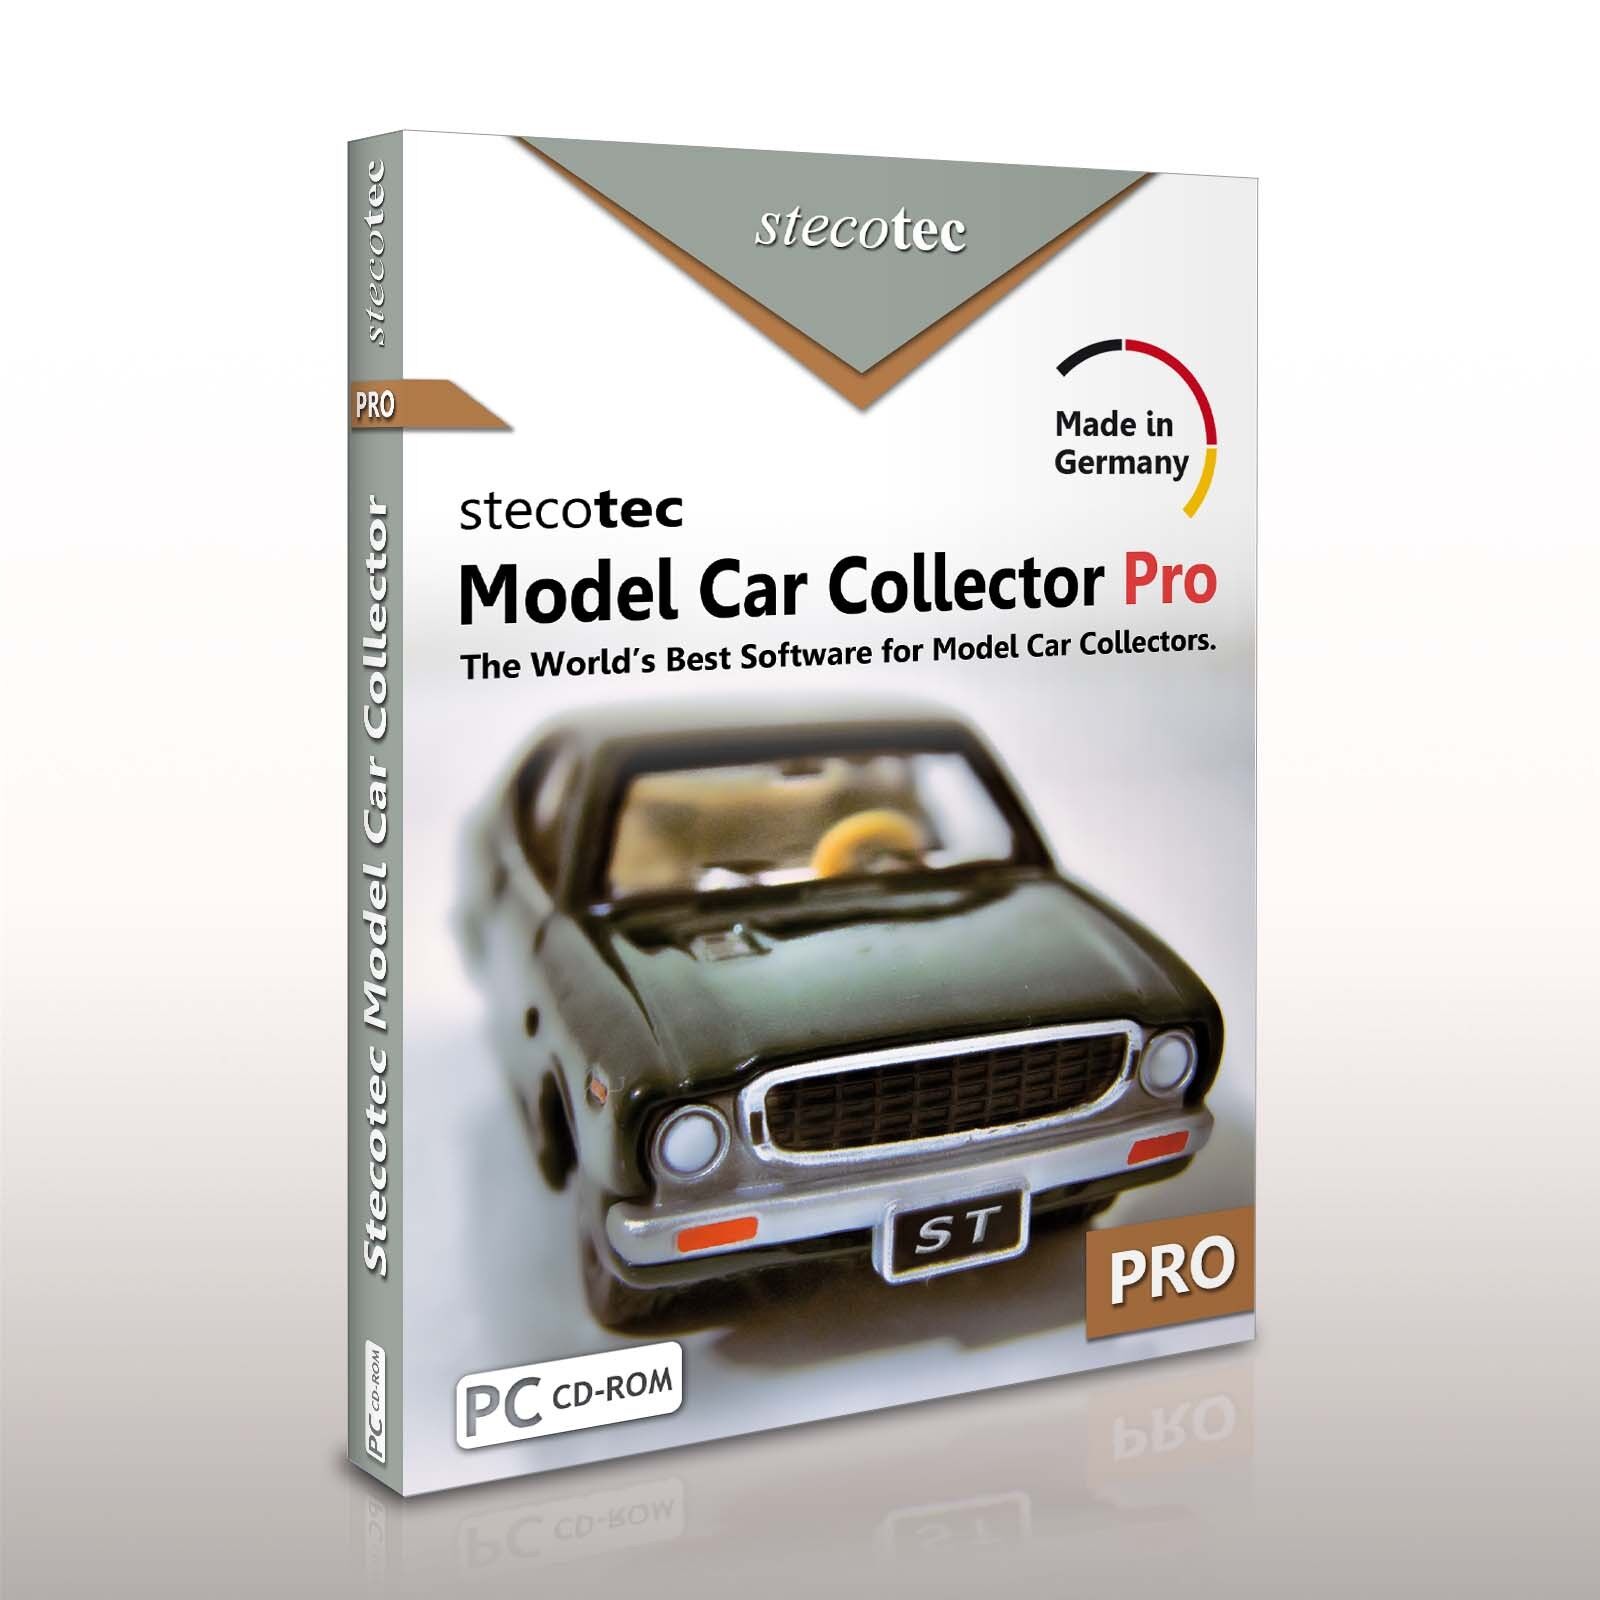 Stecotec Model Car Collector Pro: Software for Your Diecast Collection [CD-ROM]